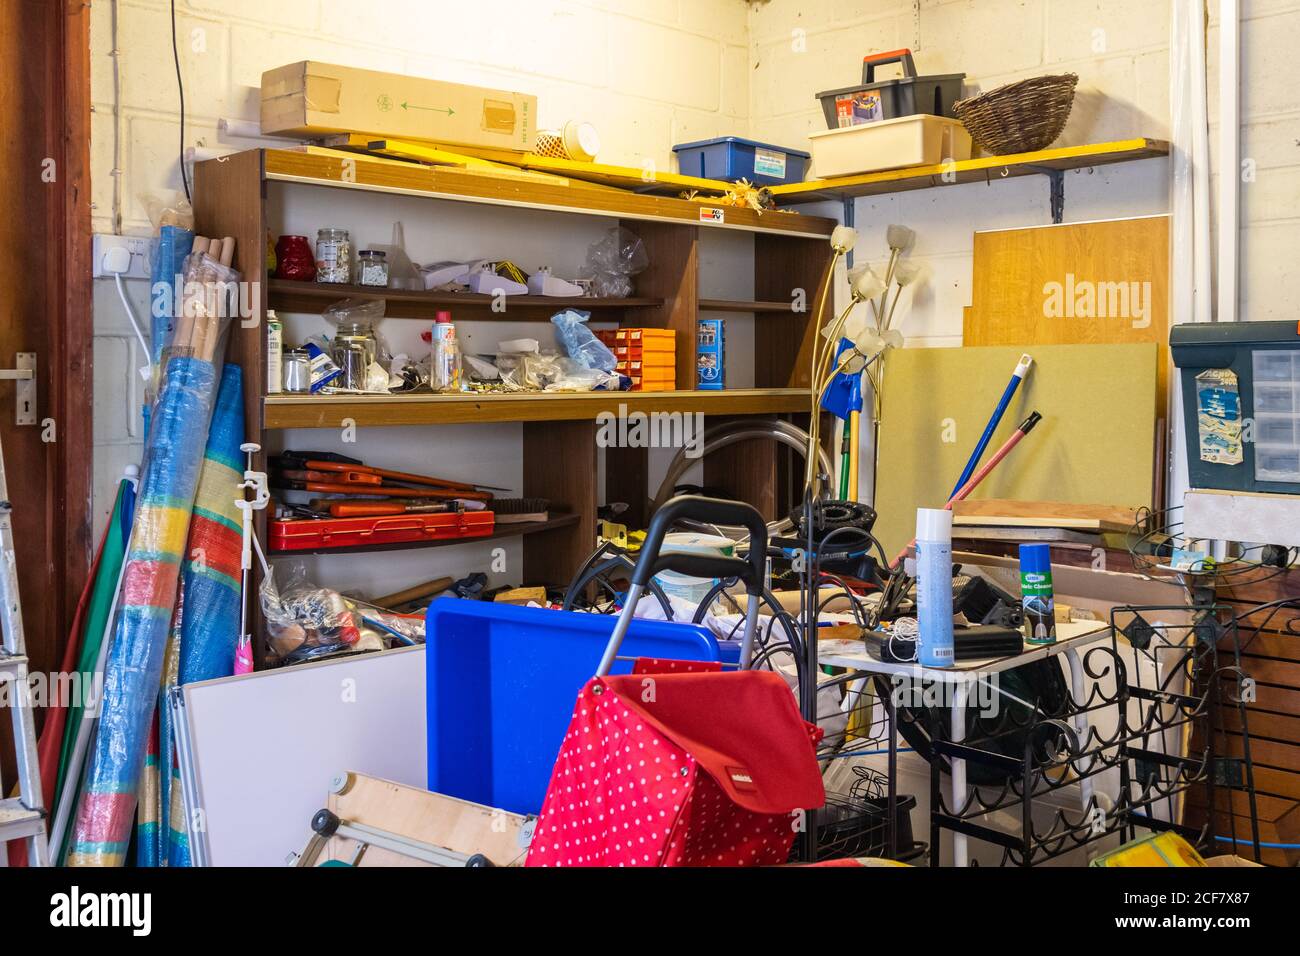 Cluttered storage space in a garage, full of untidy and messy junk from hoarding over several years. Clutter in garage. Stock Photo